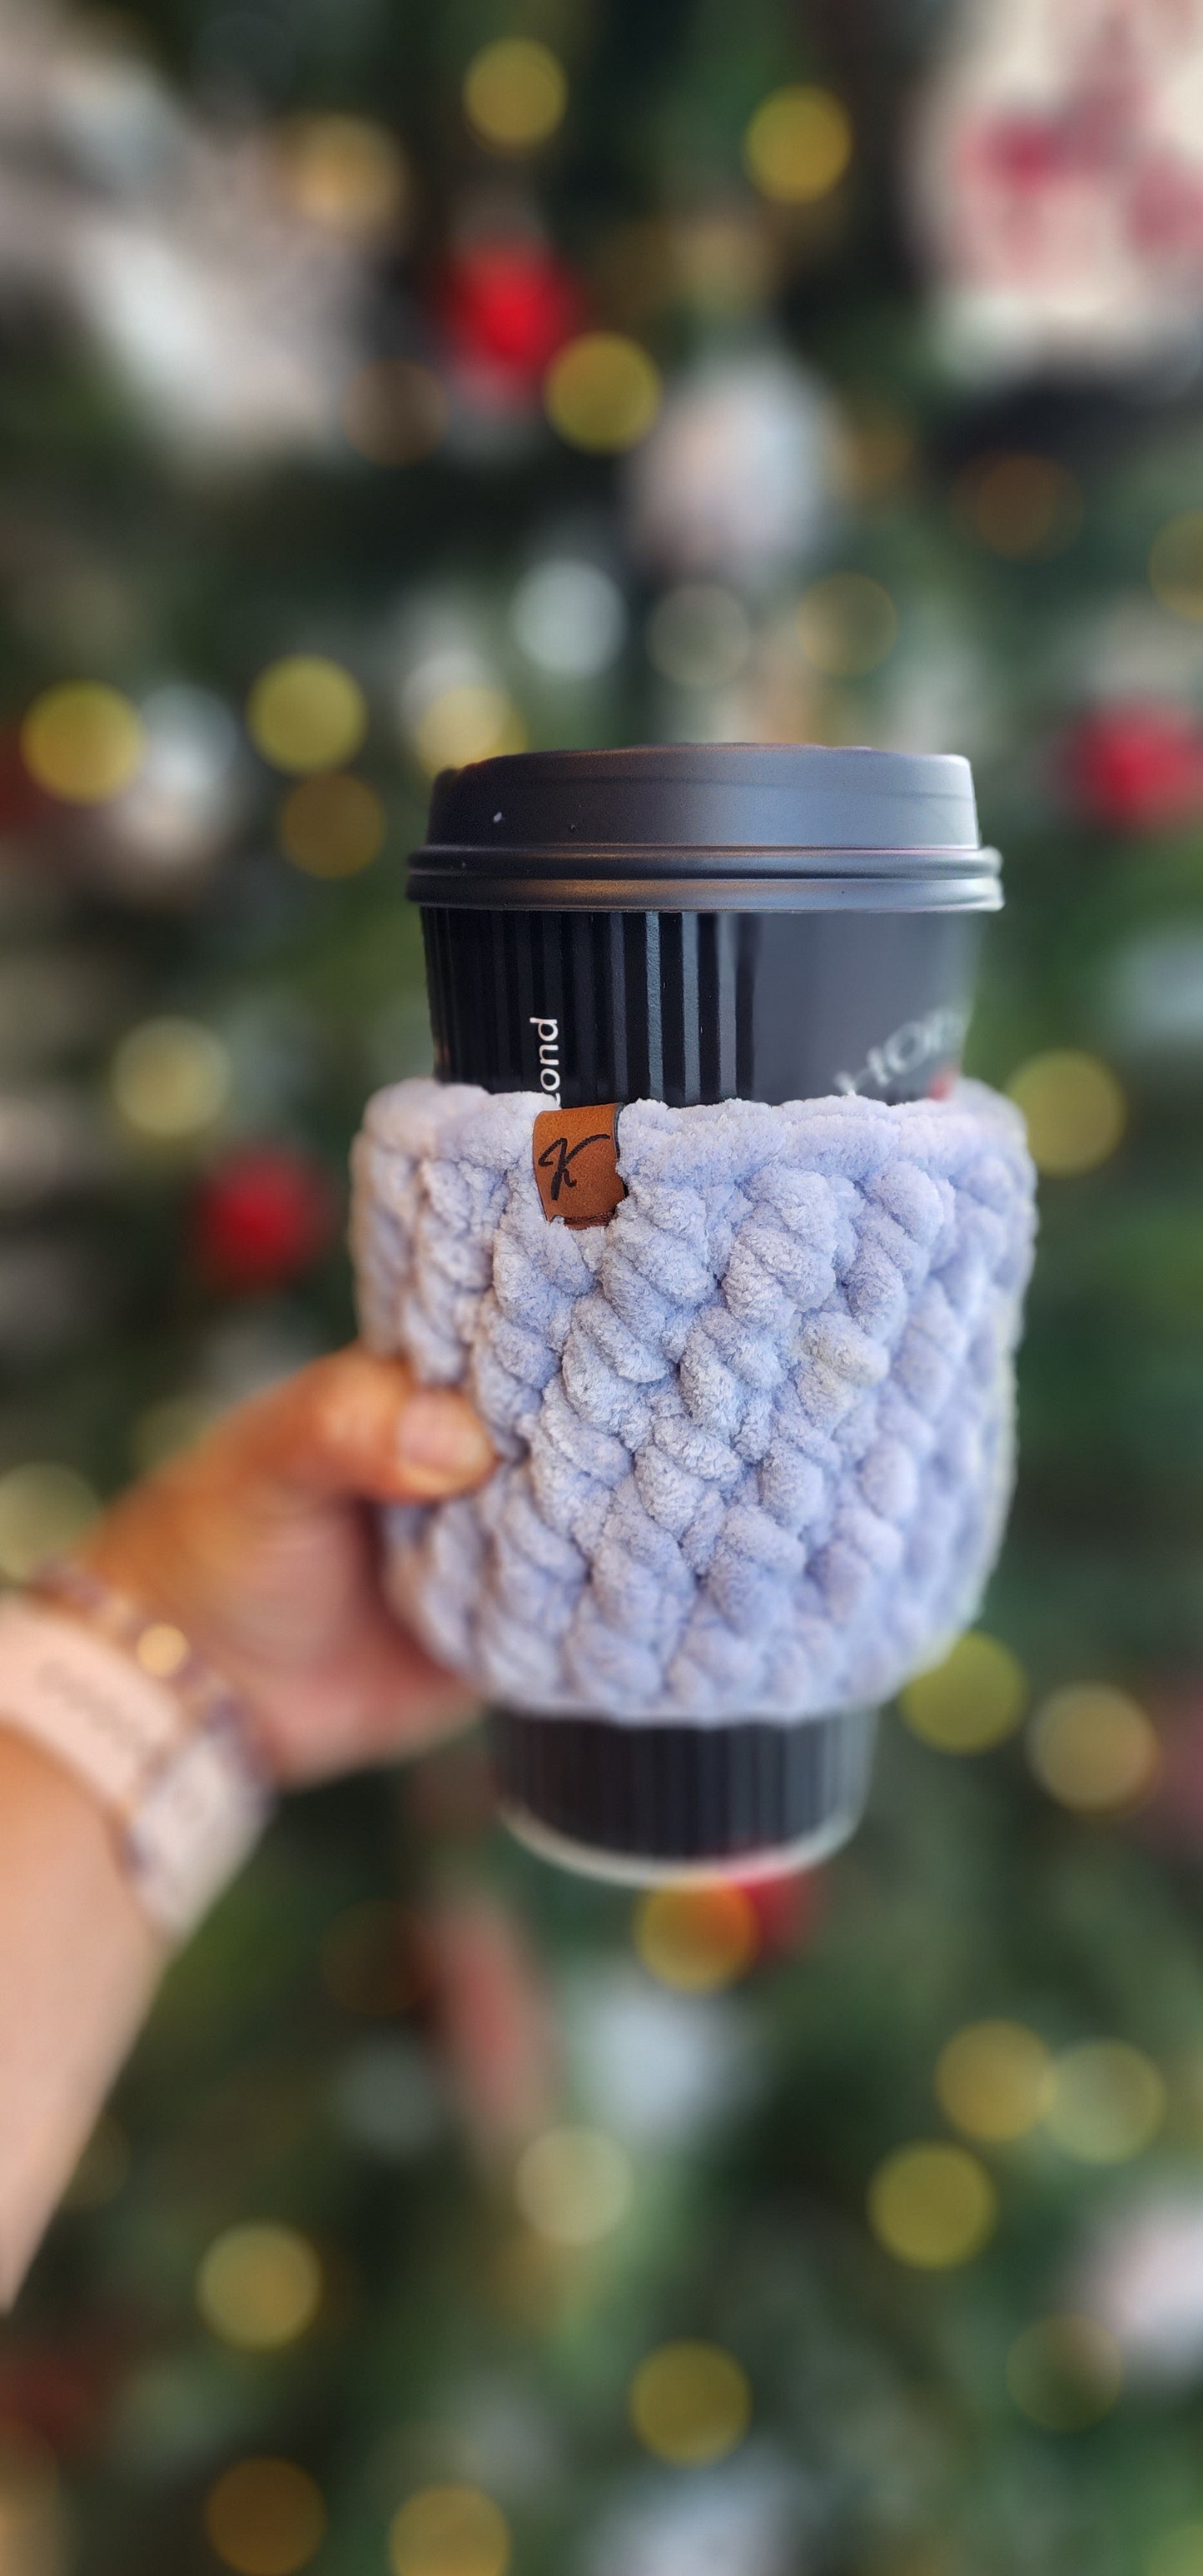 Kalipay Cozy Coozie